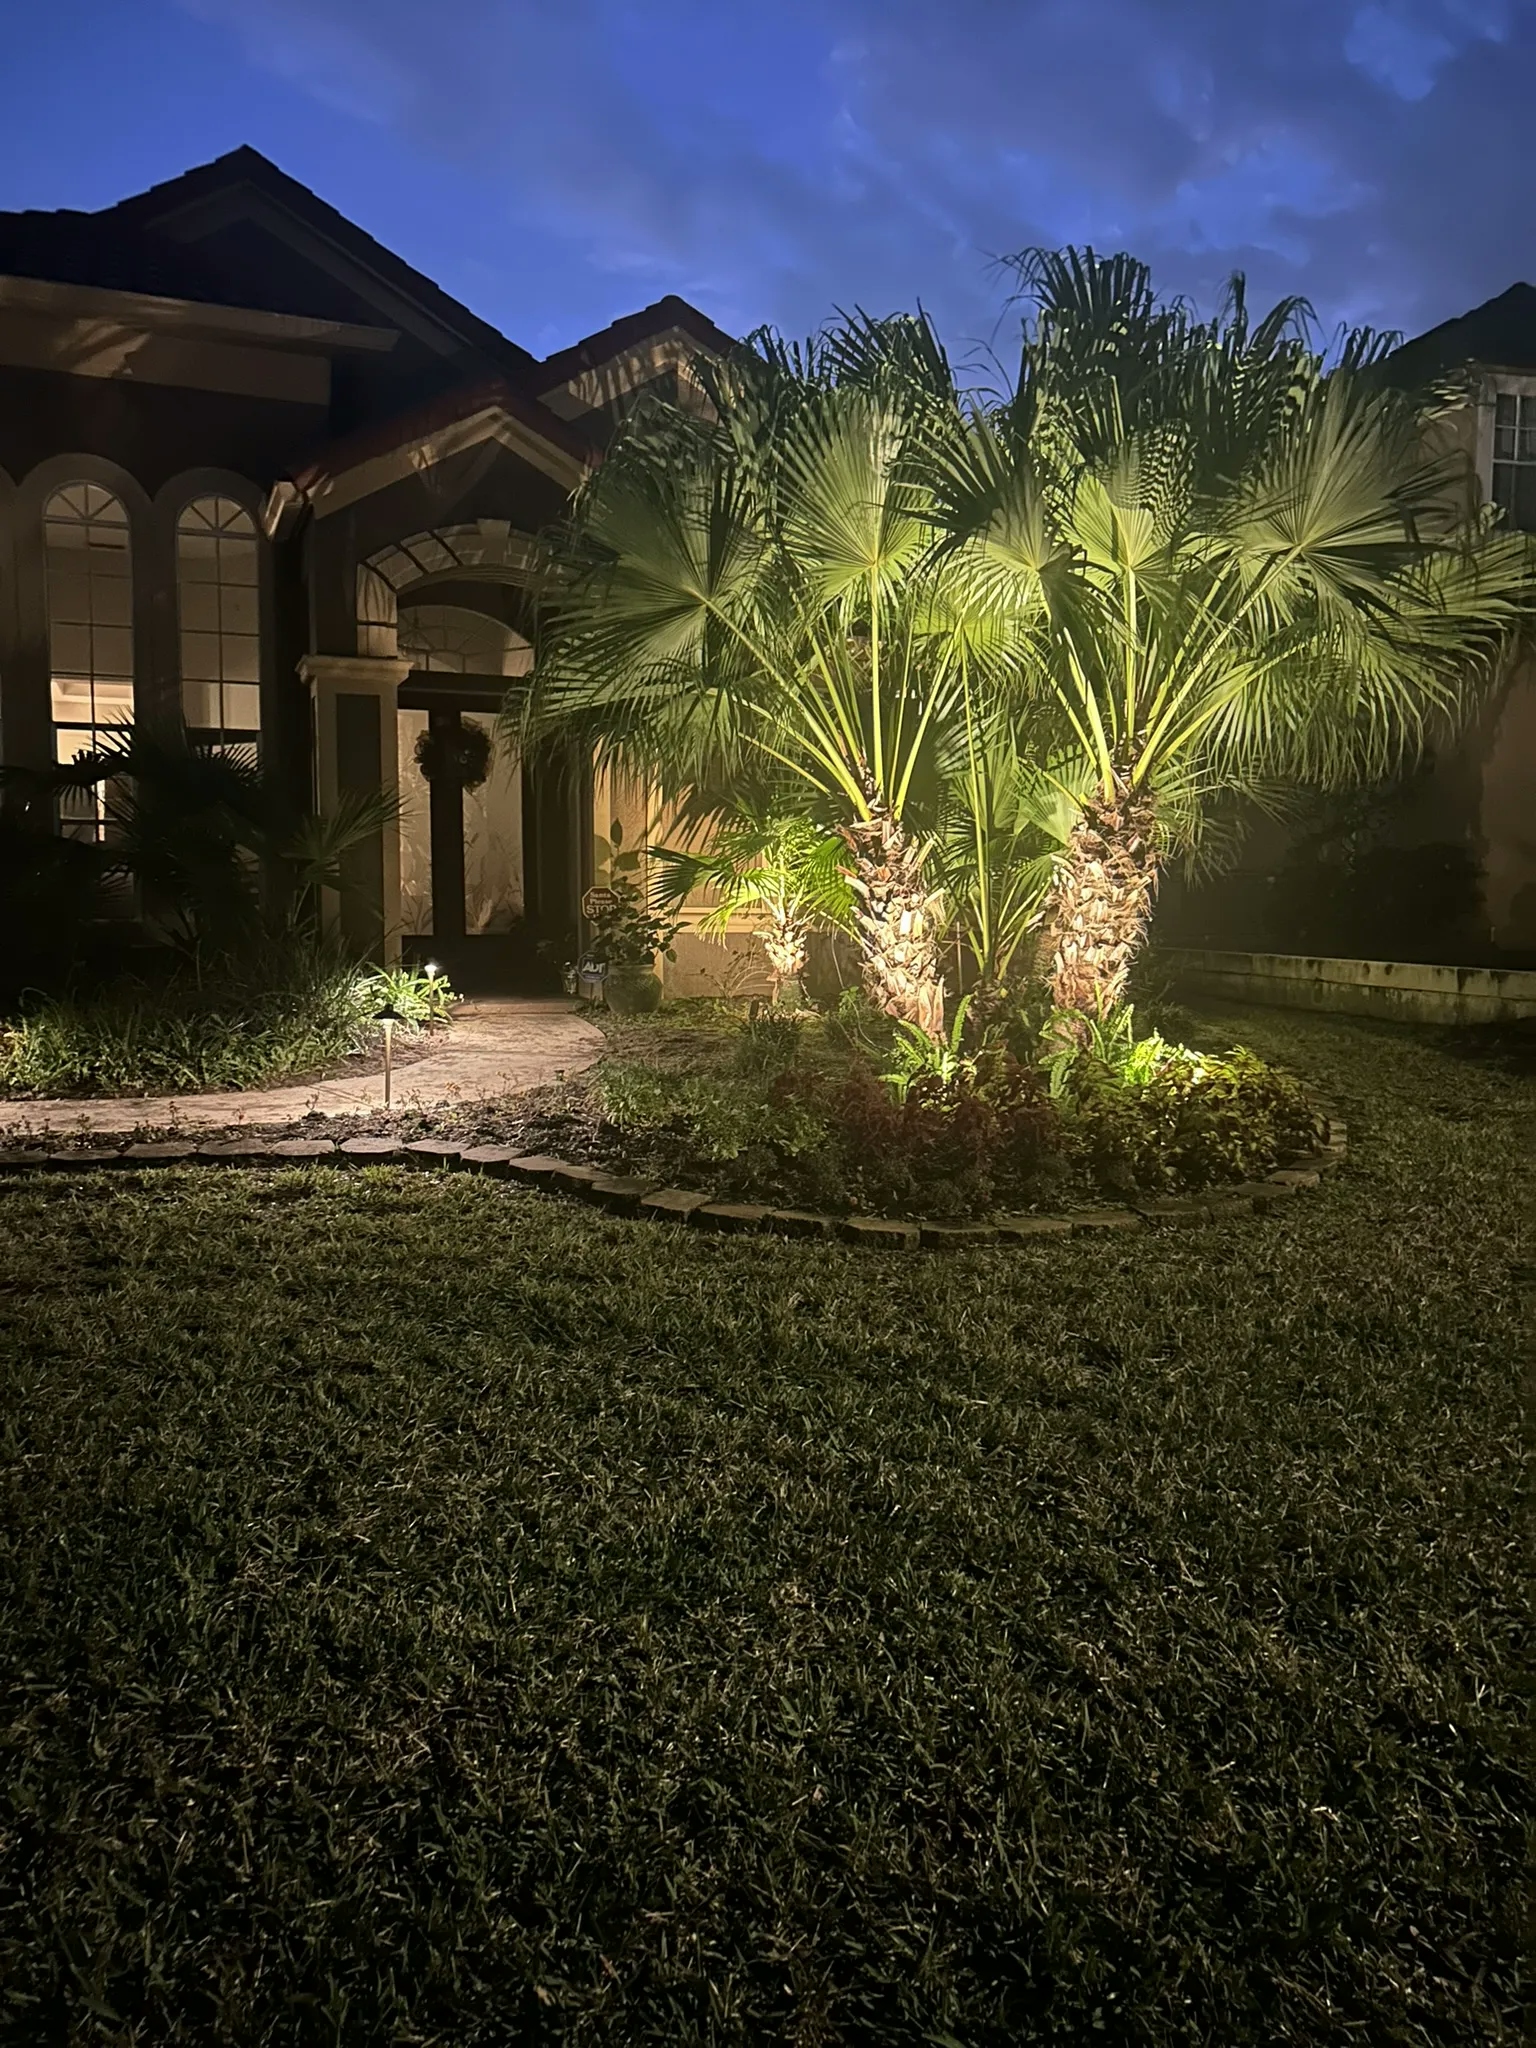 A well-lit pathway leads up to a house, with palm trees and other plants illuminated in the front yard.